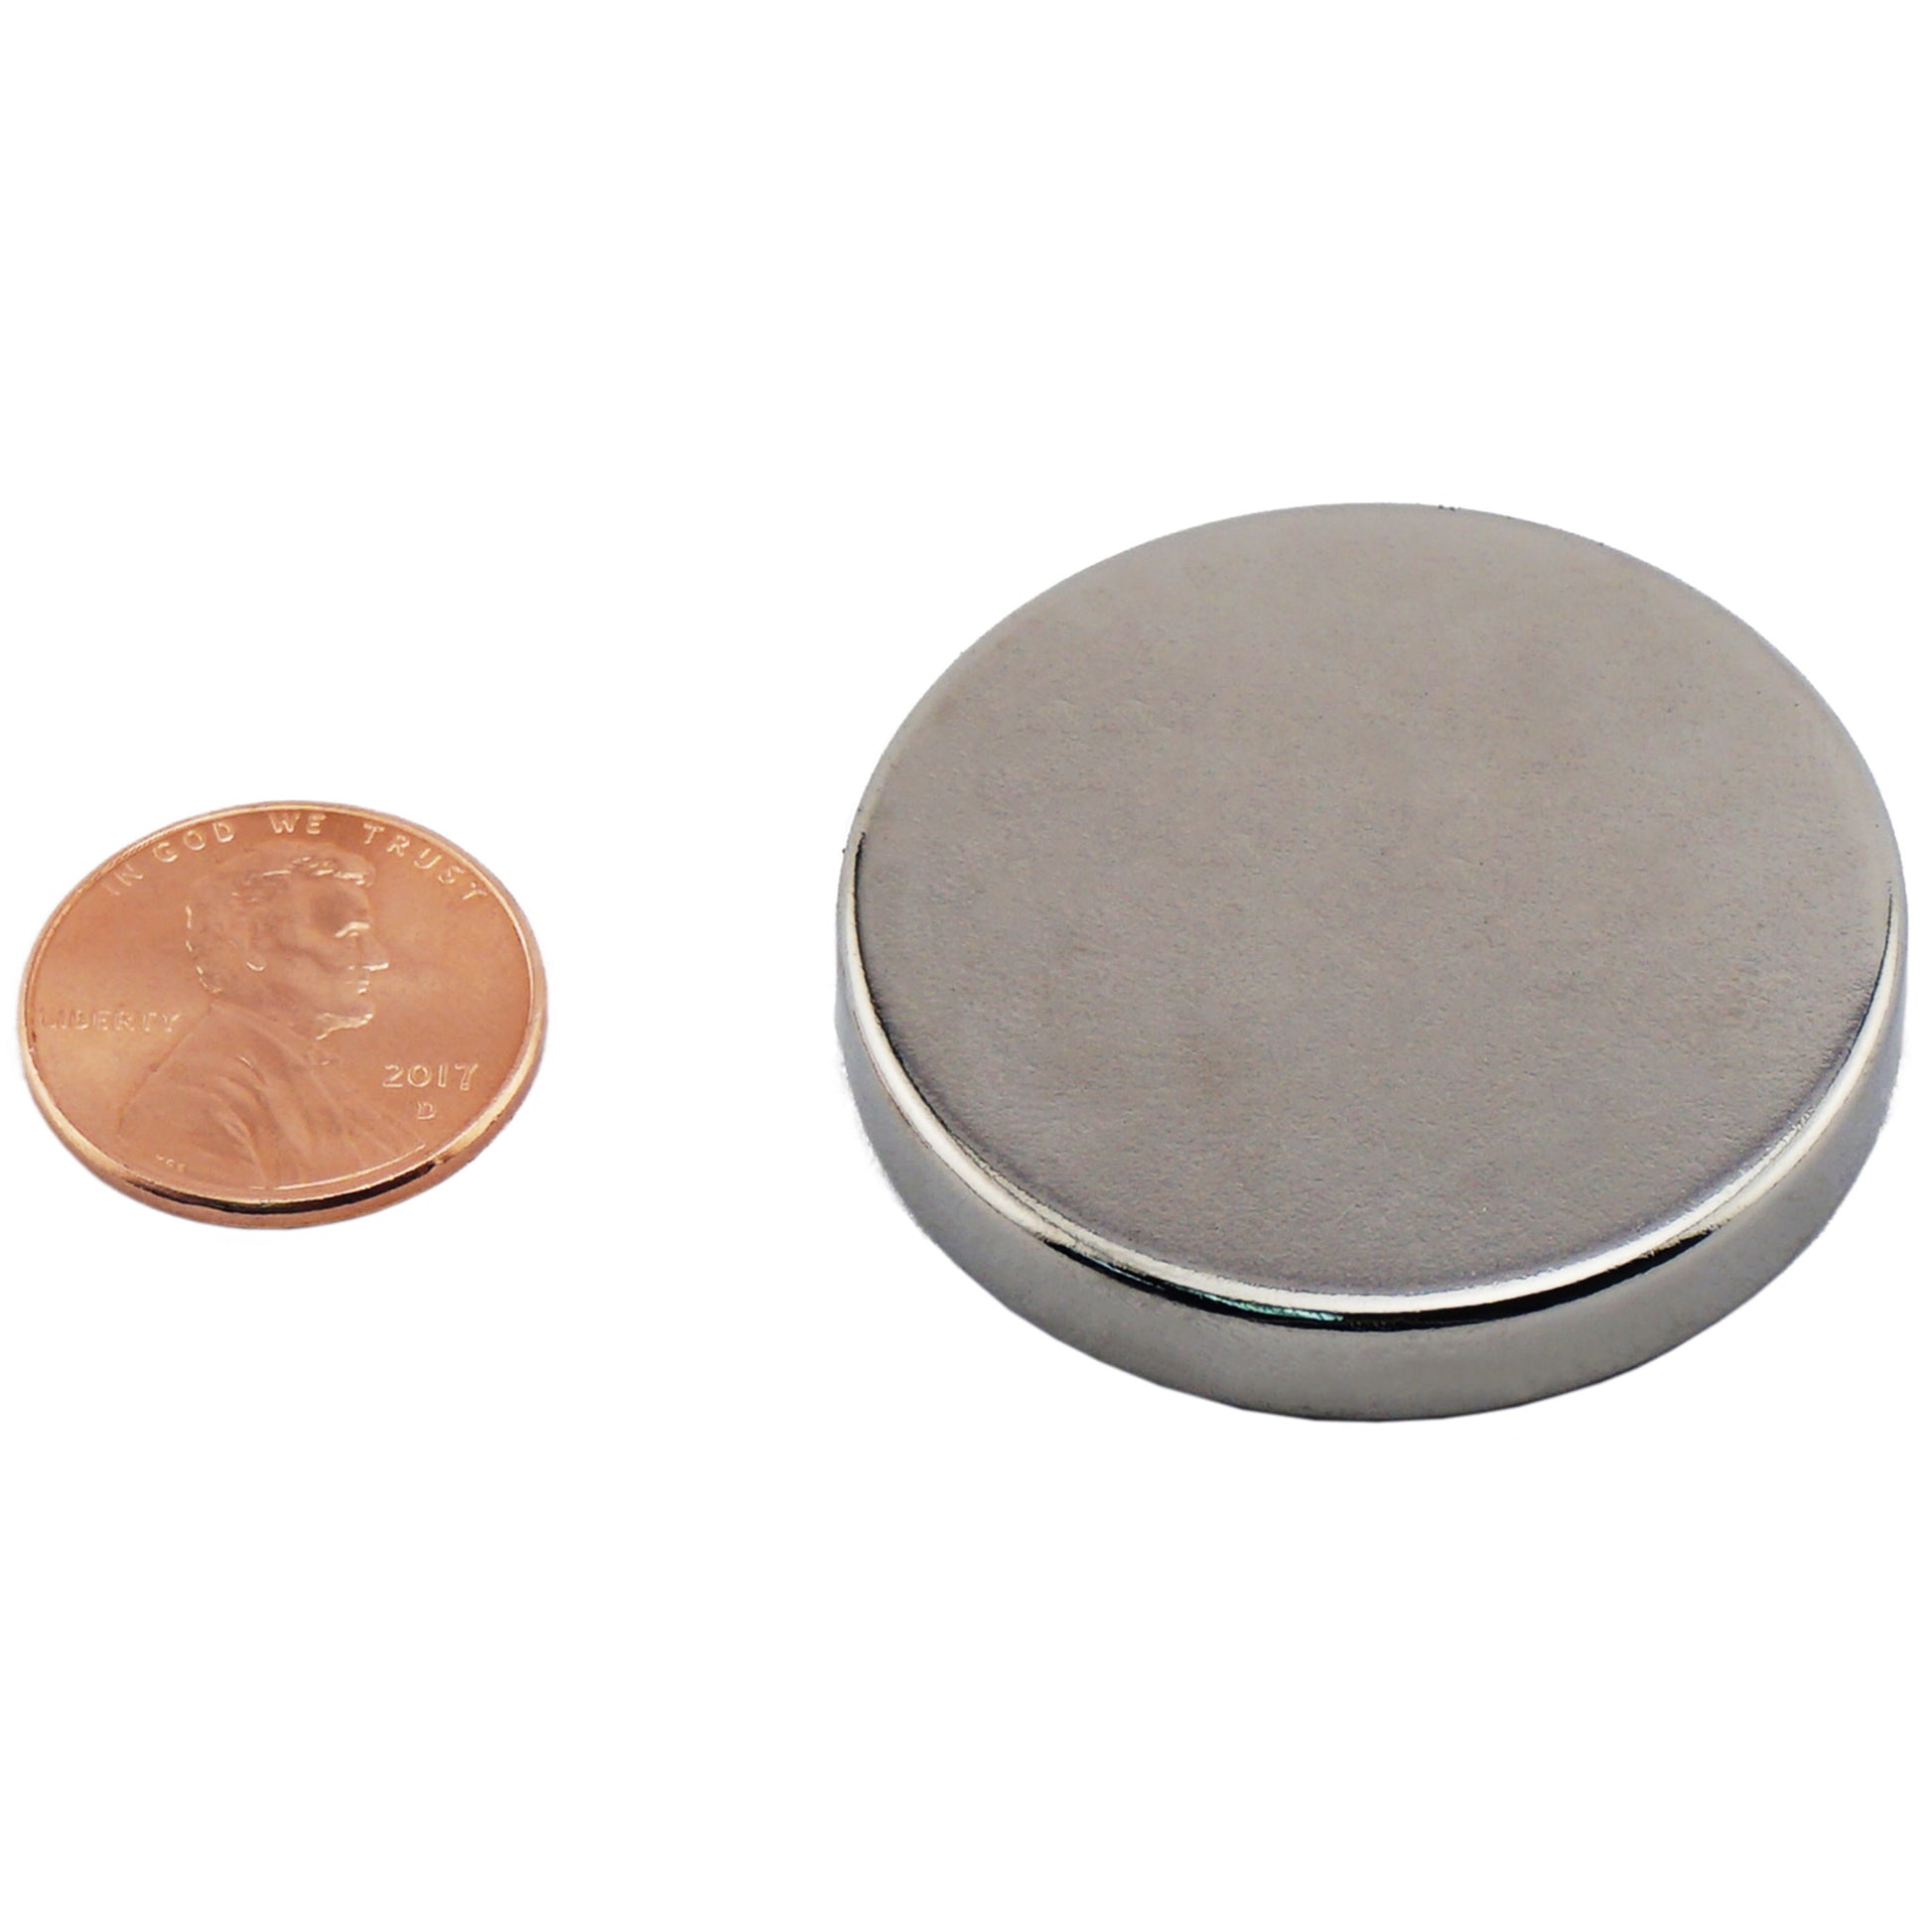 Load image into Gallery viewer, ND015007N Neodymium Disc Magnet - Compared to Penny for Size Reference